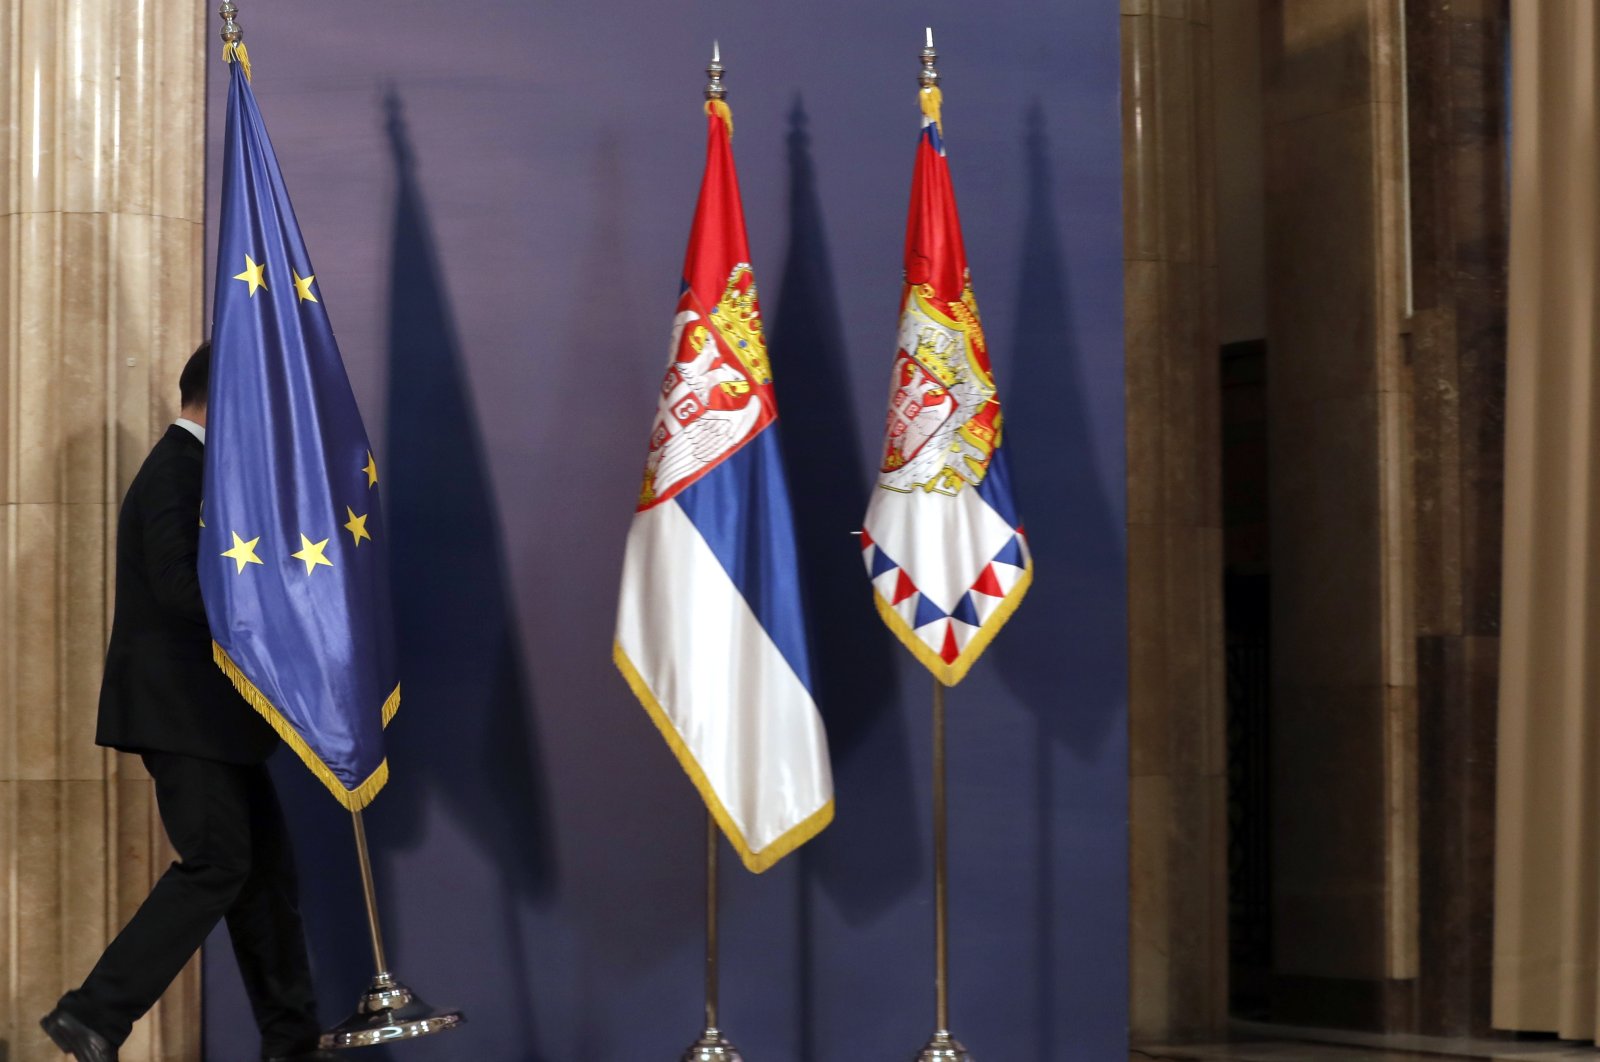 A staff member carries the EU flag before a press conference in Belgrade, Serbia, Friday, Jan. 24, 2020. (AP Photo)